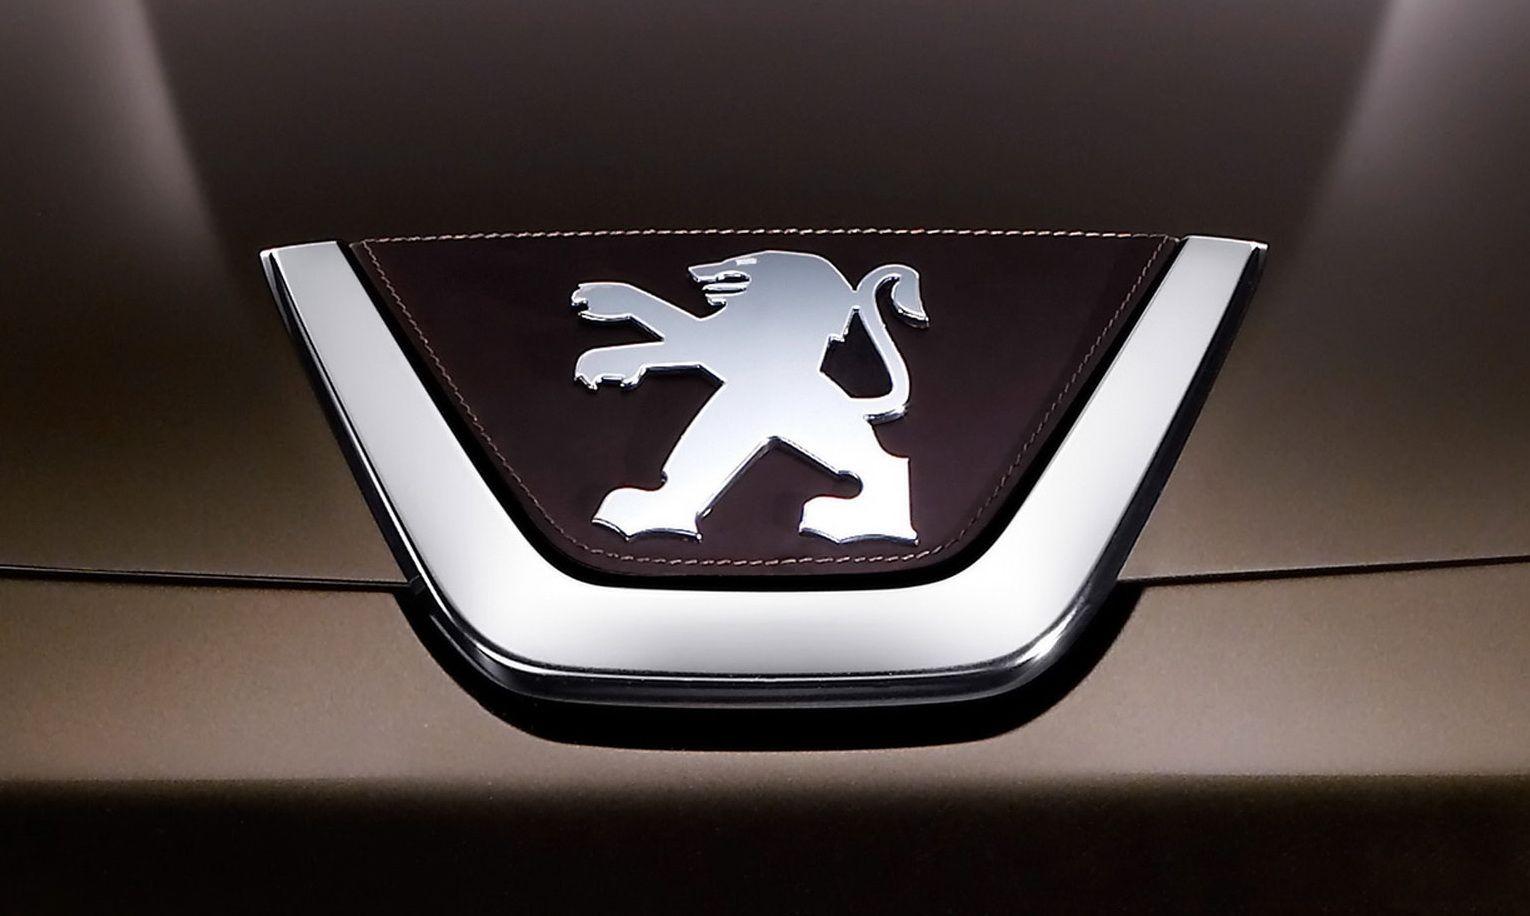 Foreign Luxury Car Logo - Peugeot Logo, Peugeot Car Symbol Meaning and History | Car Brand ...